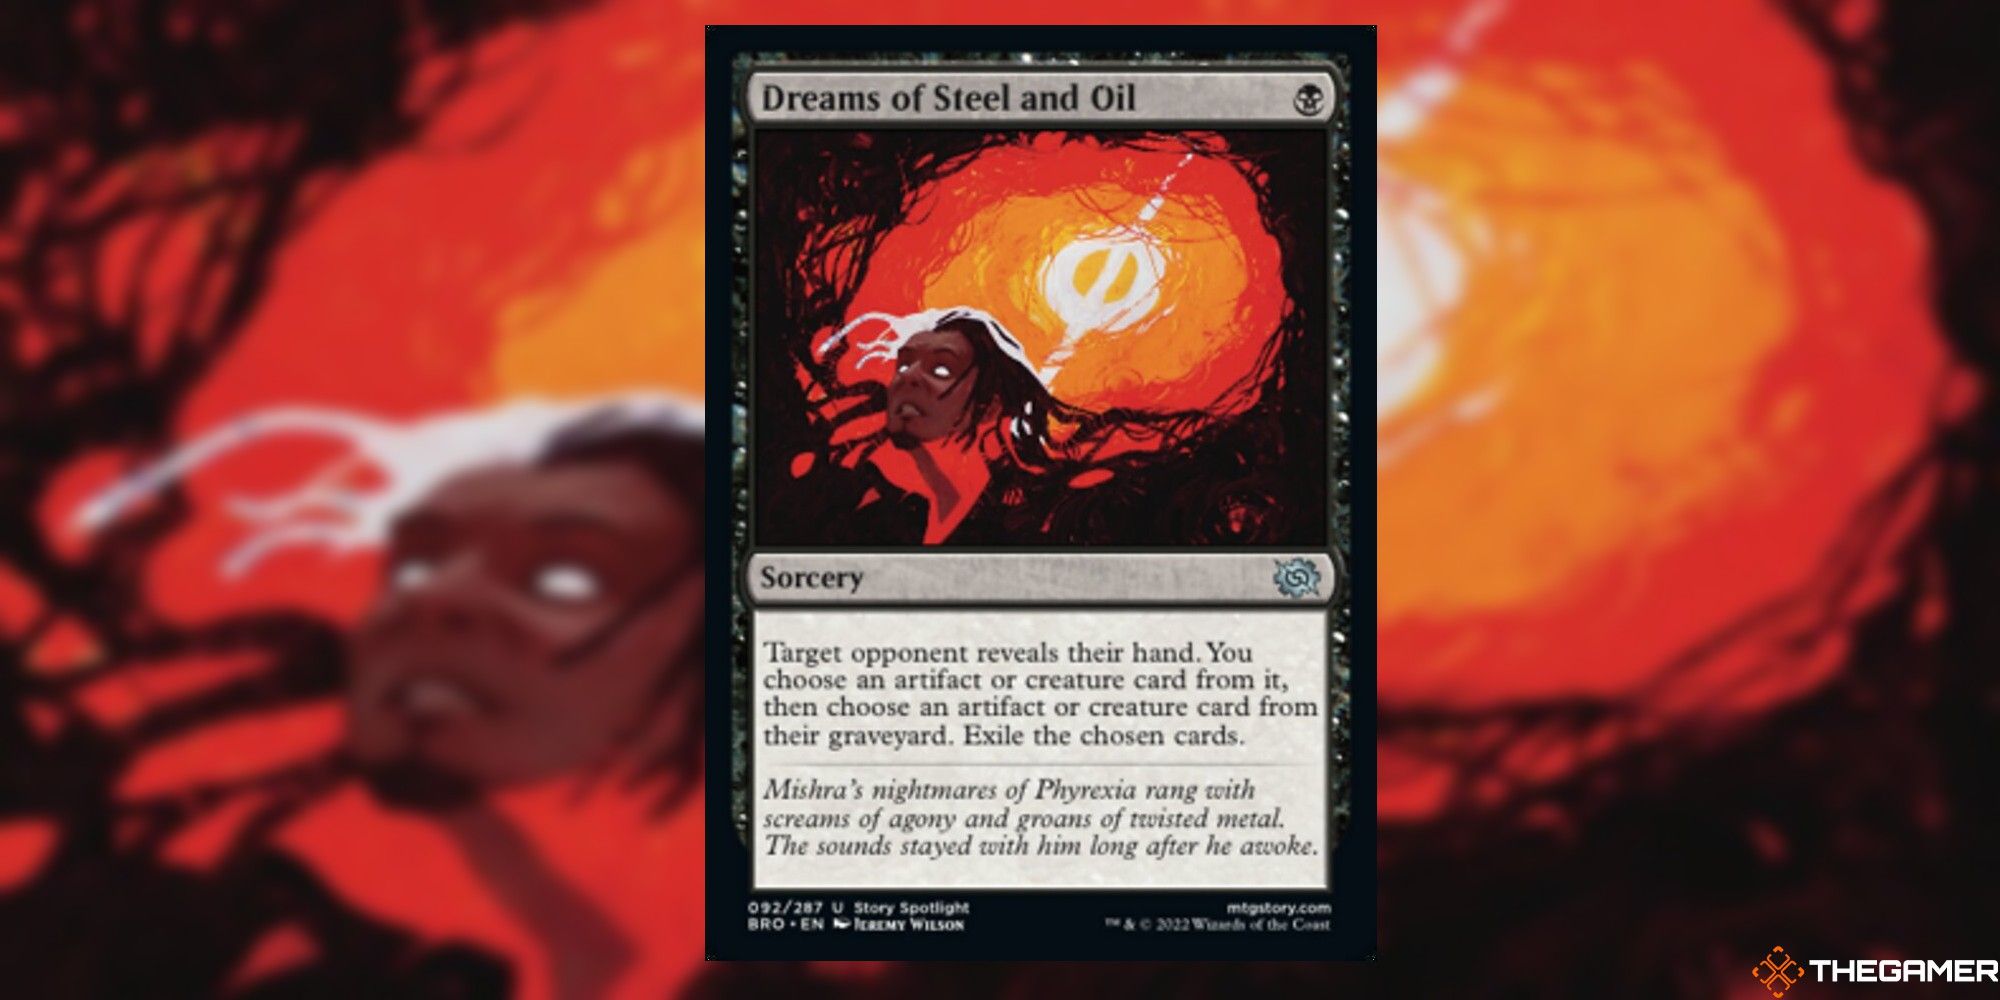 Dreams Of Steel And Oil card and art background